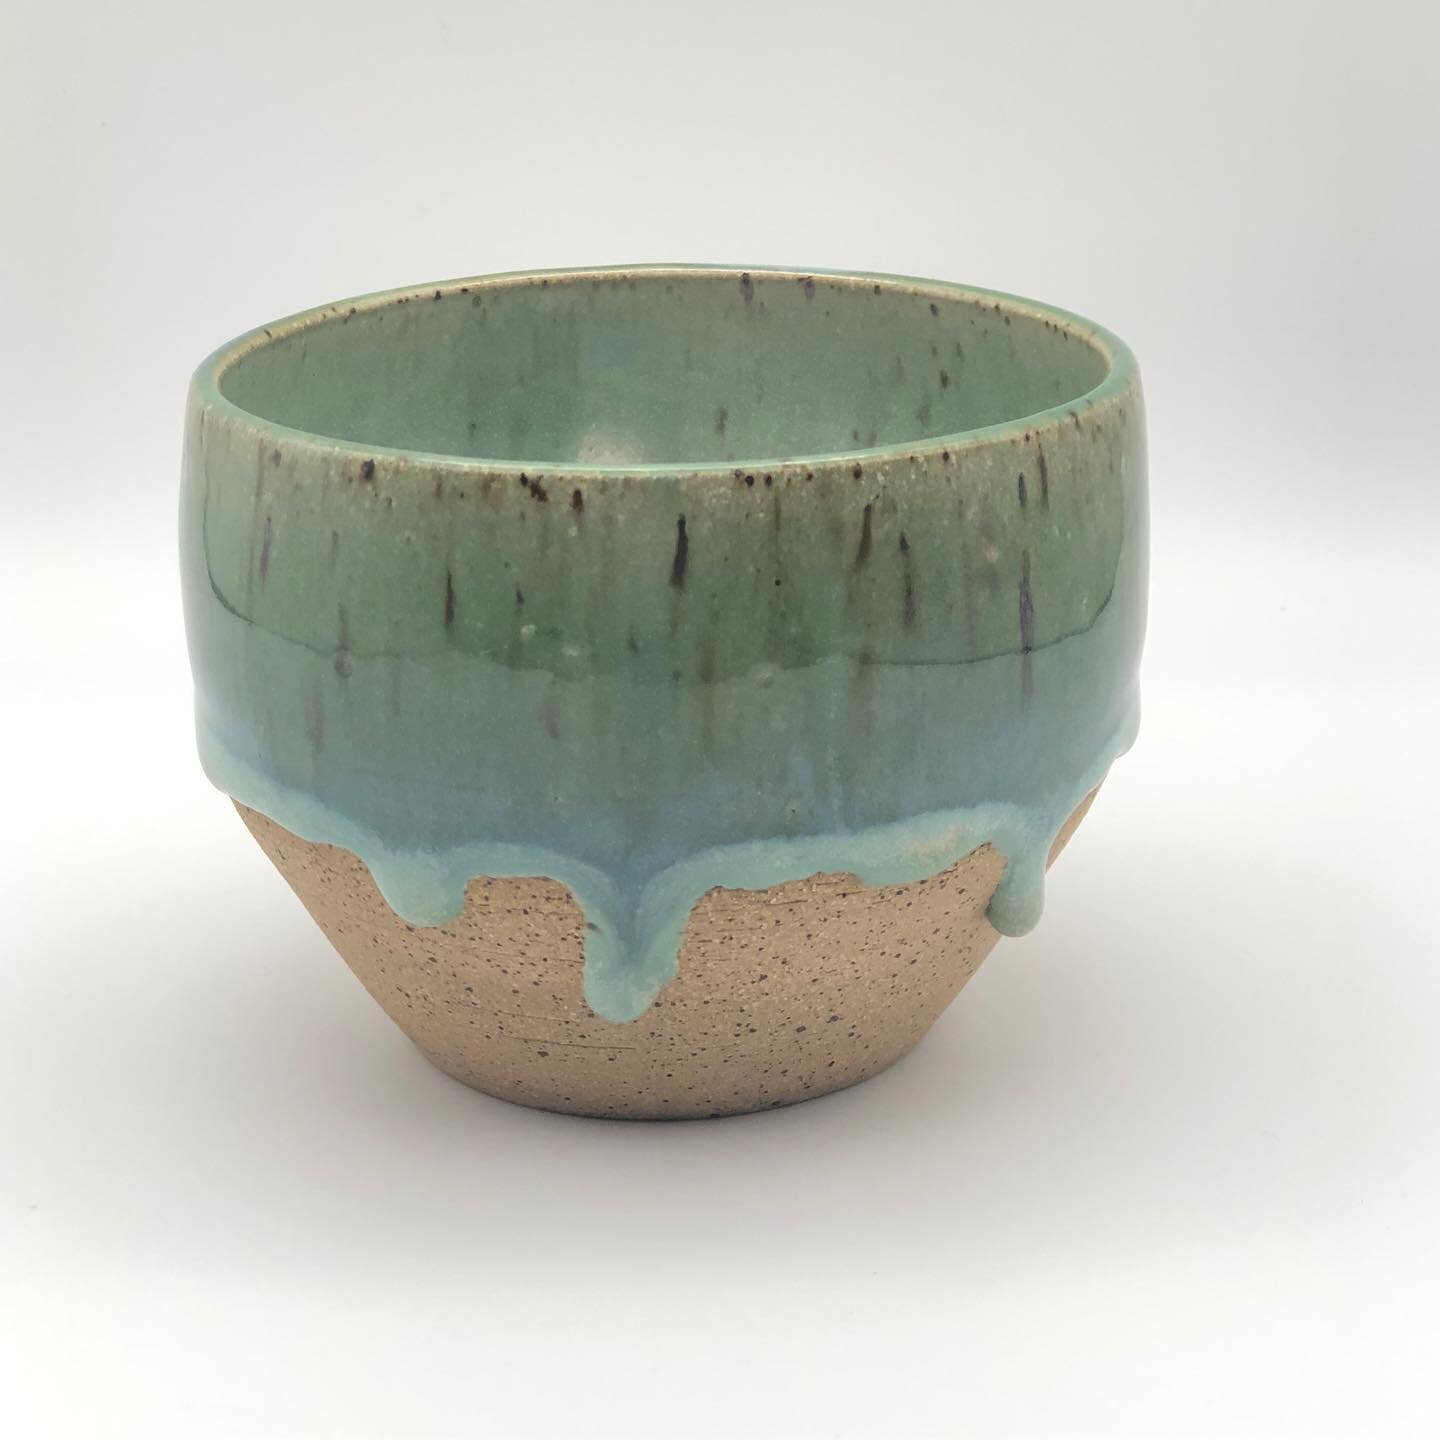 ✨MAKER FEATURE✨
@nafpottery 
.
Link to her website in our info!
. 
We have so many awesome makers at GnarWare, so we are featuring some of their amazing work! 
Nancy started at the studio a couple months into our opening. She had been throwing for ab